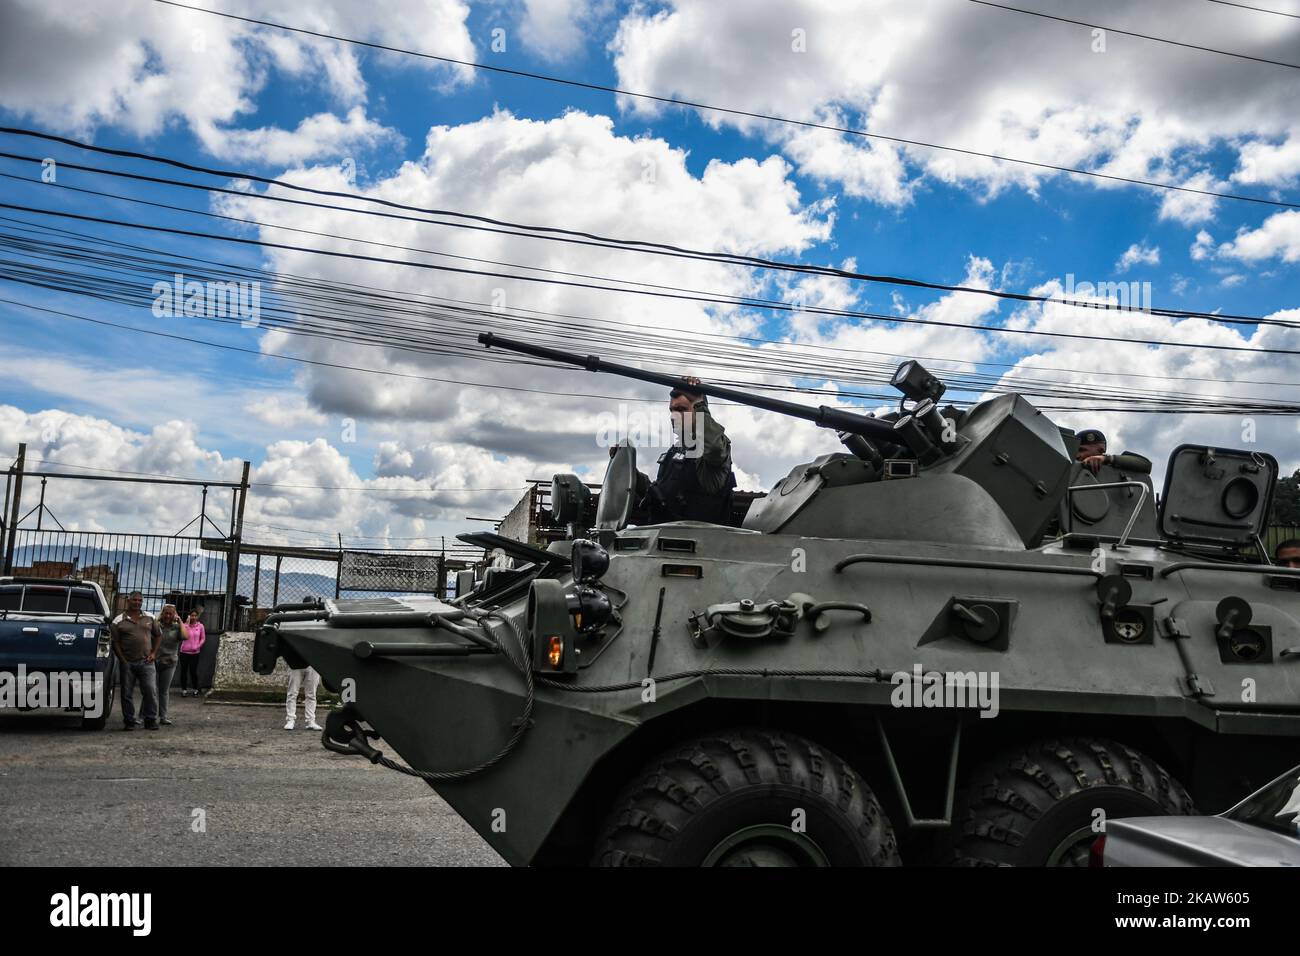 Members of the Venezuelan army patrol Caracas as an operation to capture Oscar Perez, a rebel against the government of Nicolas Maduro, died after a special capture operation carried out by the Special Actions Forces of the Bolivarian National Police in Caracas, Venezuela on 18 January 2018. Several people, including two police officers, were killed (Photo by Roman Camacho/NurPhoto) Stock Photo